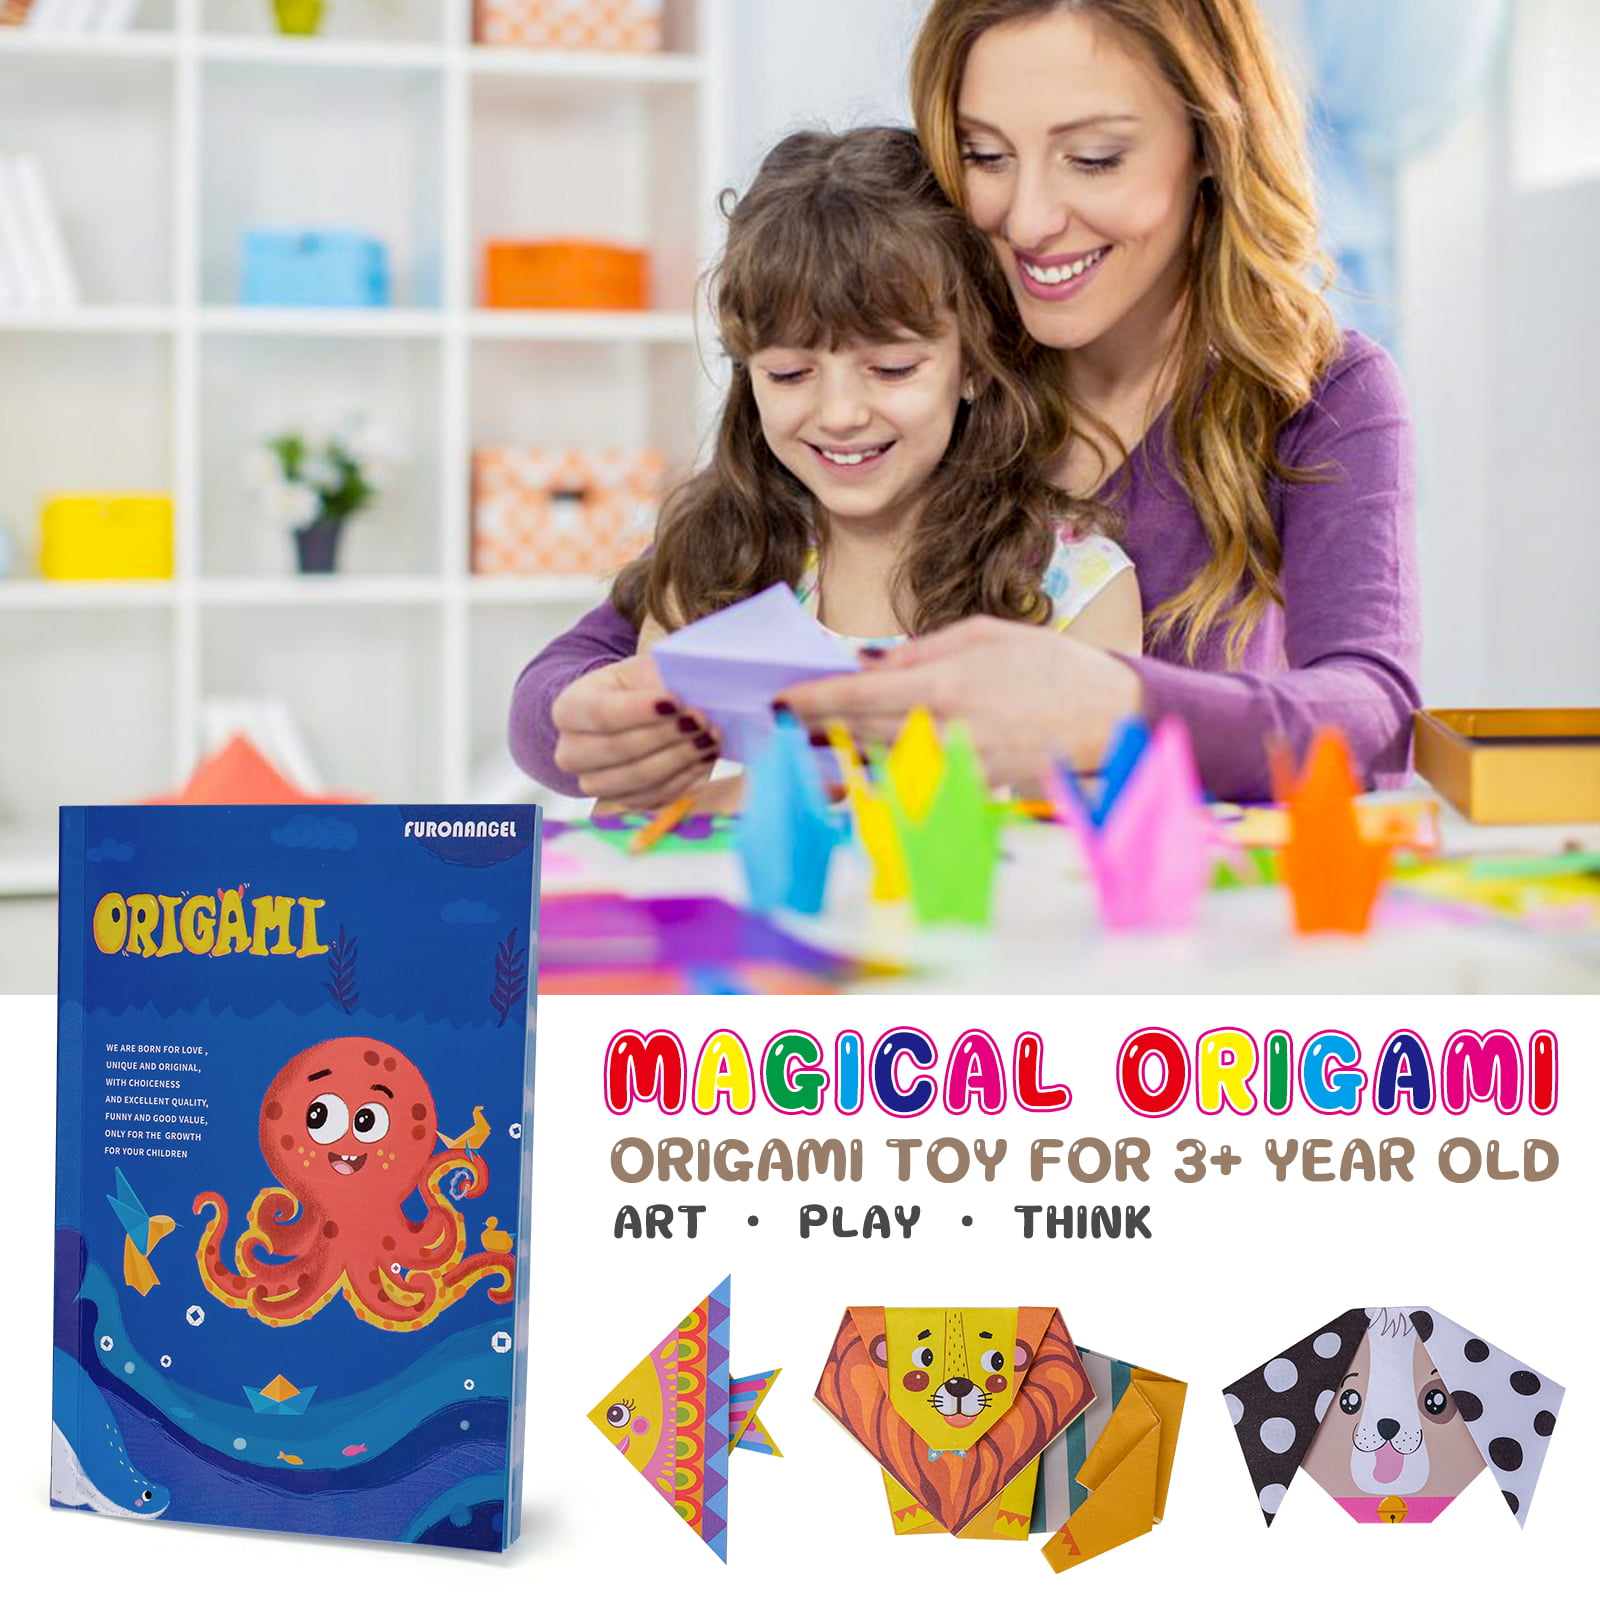 Dream Fun Arts and Crafts Gifts for 10 11 12 13 Year Old Kids,DIY